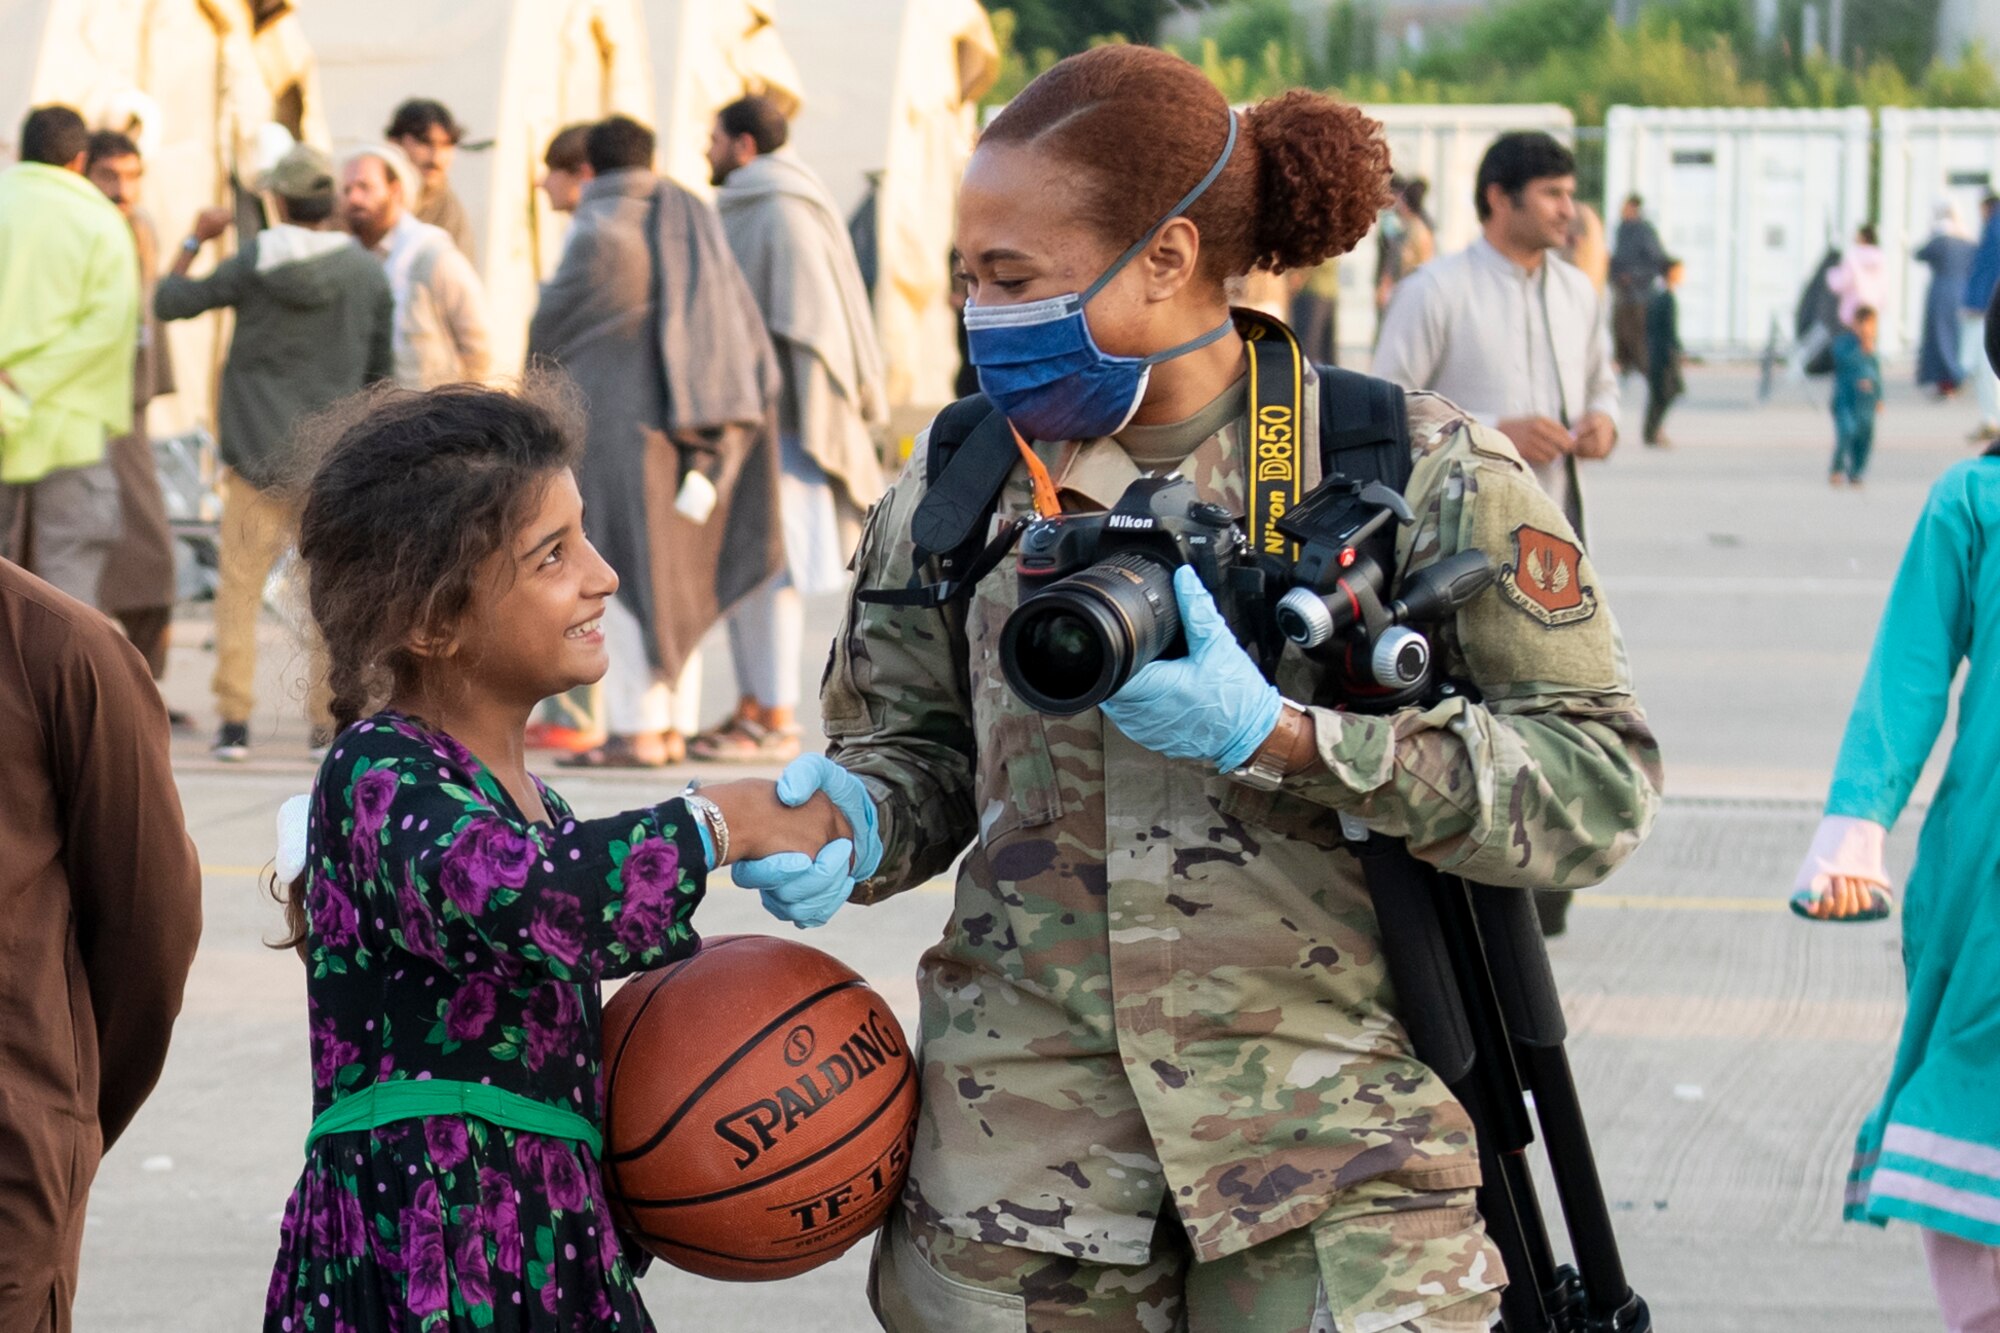 U.S. Air Force Senior Airman Gabrielle Winn, 501st Combat Support Wing public affairs journeyman, greets a child during Operation Allies Refuge at Ramstein Air Base, Germany, Aug. 31, 2021. Volunteers work around the clock to support evacuees during their time at Ramstein. Ramstein Air Base transformed into U.S. European Command’s primary evacuation hub, supporting one of the largest, most complex humanitarian airlift operations in history. (U.S. Air Force photo by Senior Airman Jennifer Zima)